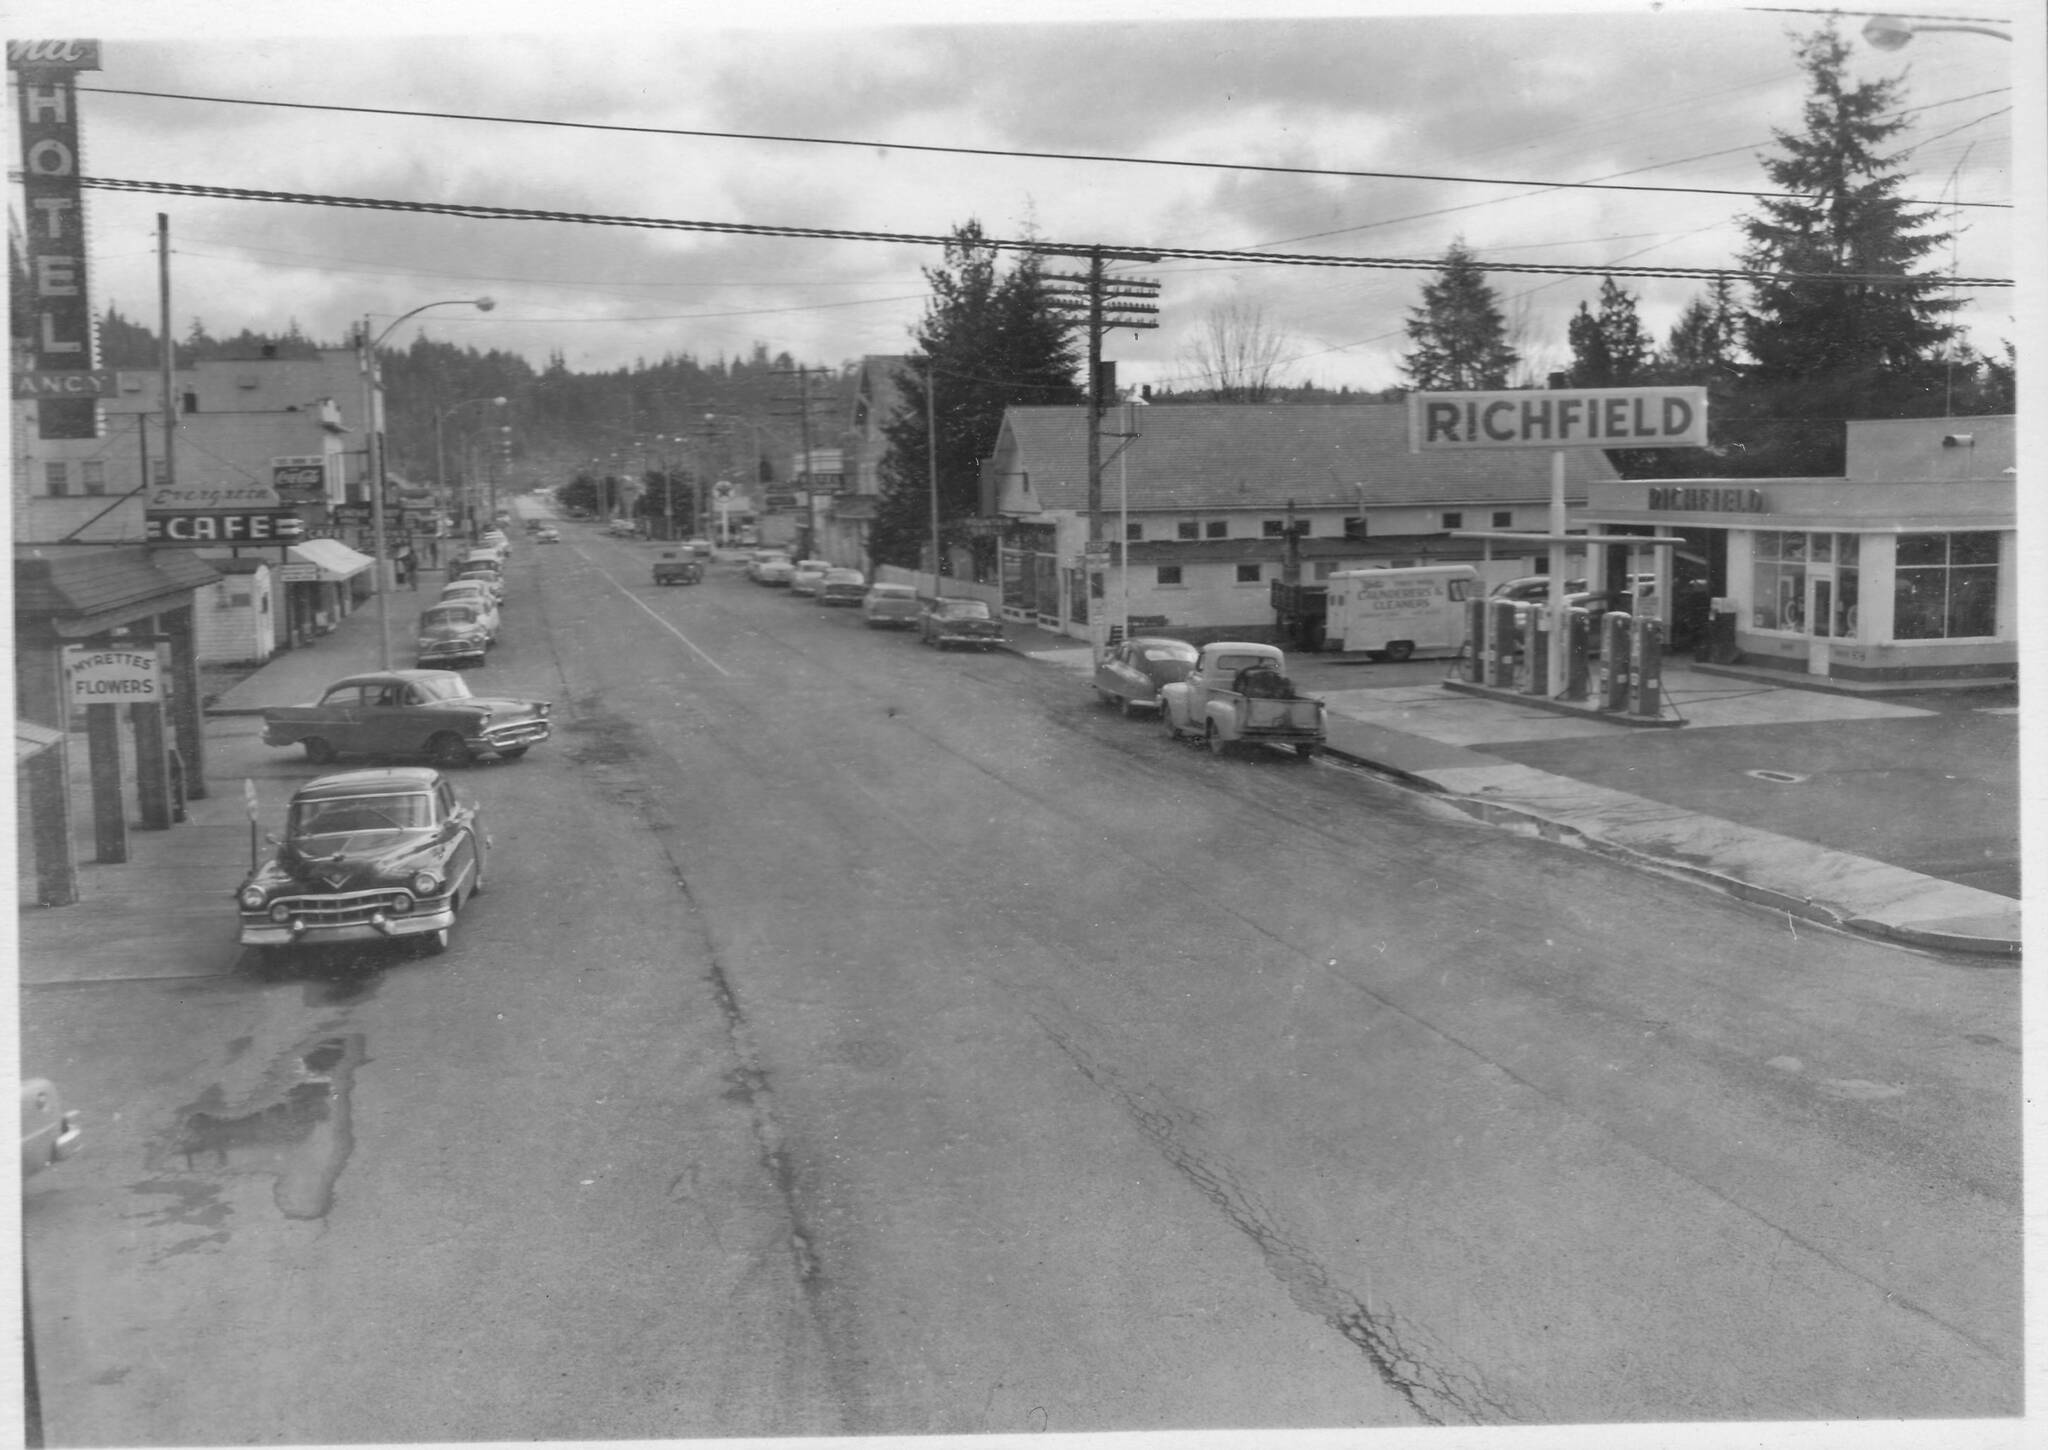 Downtown Forks looking South 1950s.